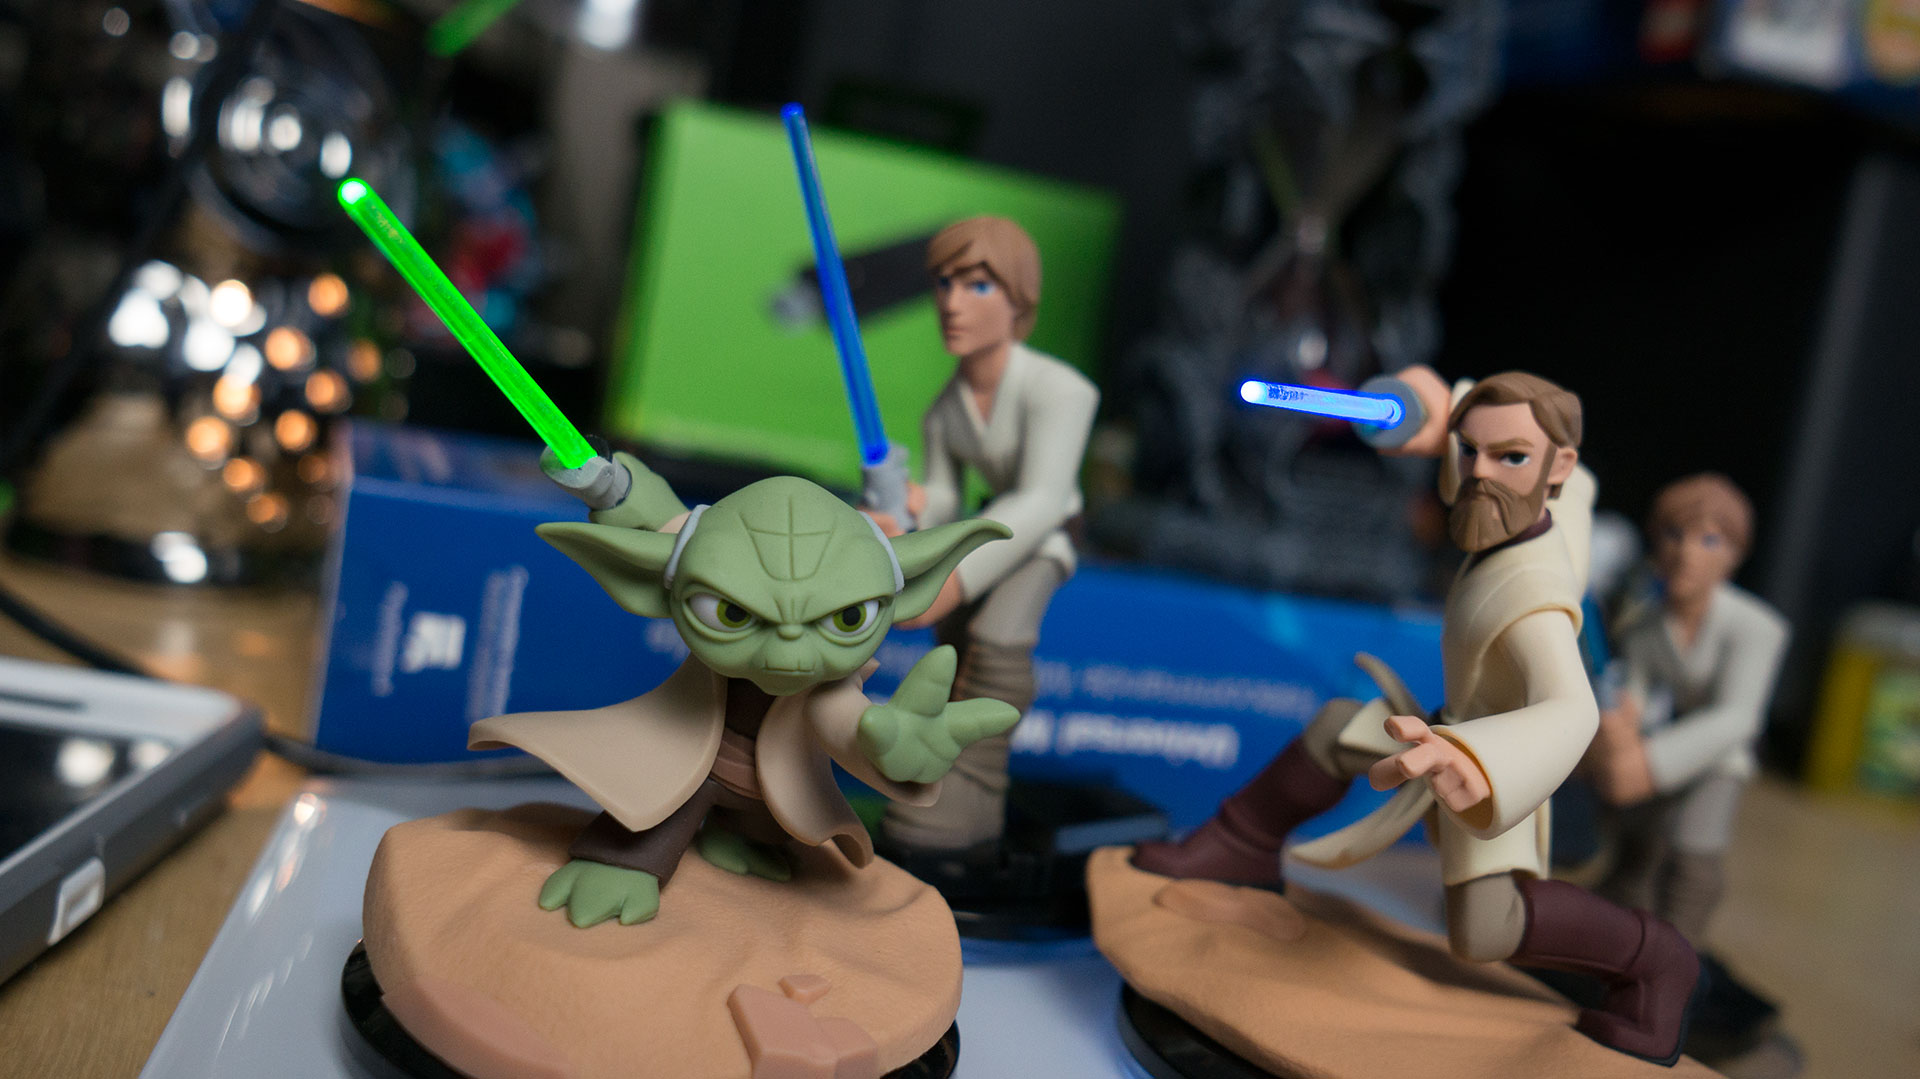 Disney Releases The Coolest Star Wars Infinity Figures In The Most Annoying Way Possible